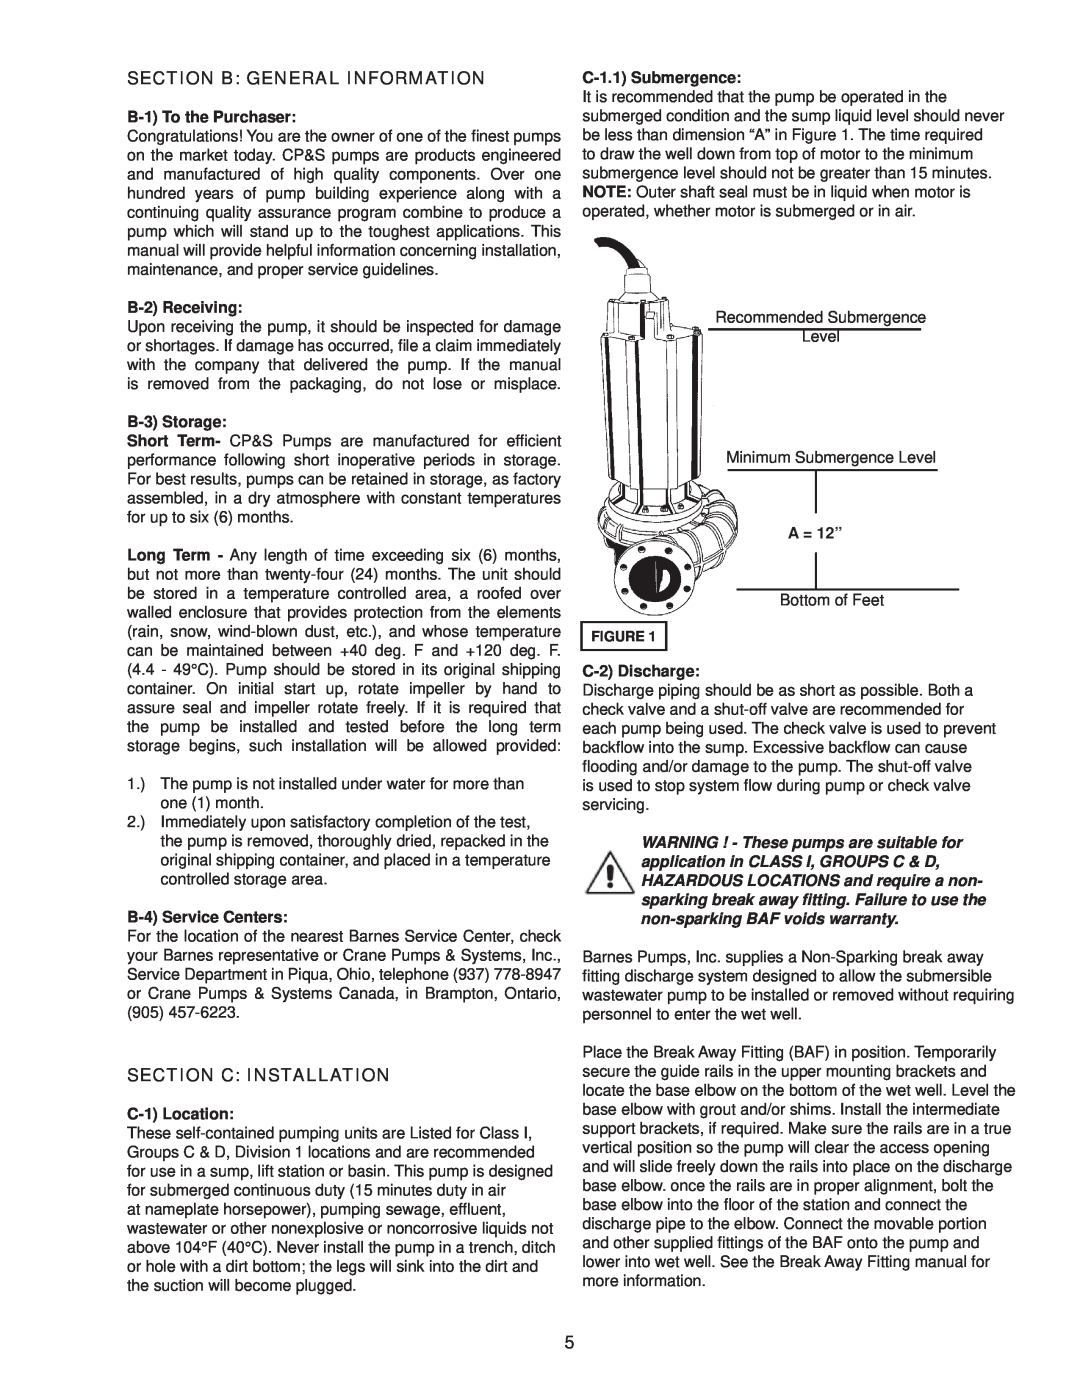 Crane Plumbing 8XSE-HA Section B General Information, Section C Installation, B-1To the Purchaser, B-2Receiving, A = 12” 